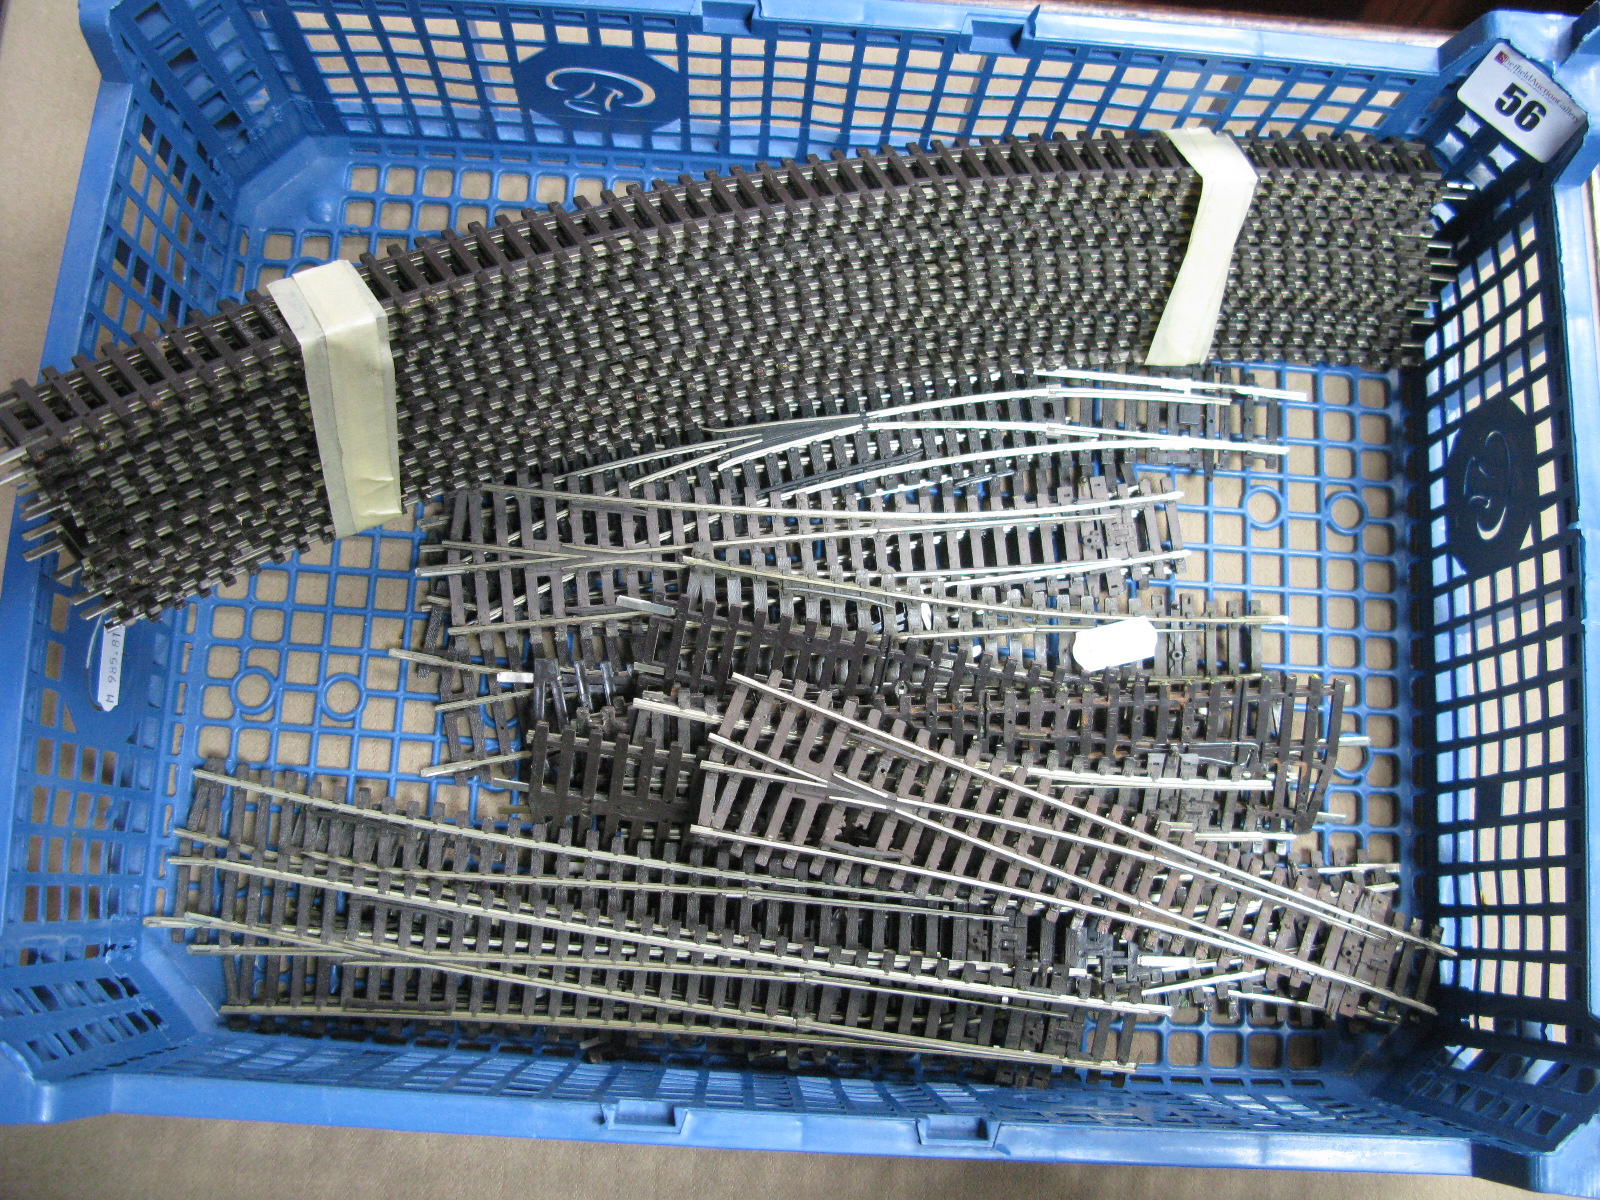 A Quantity of "OO" Scale Track, including over fifteen various size points.